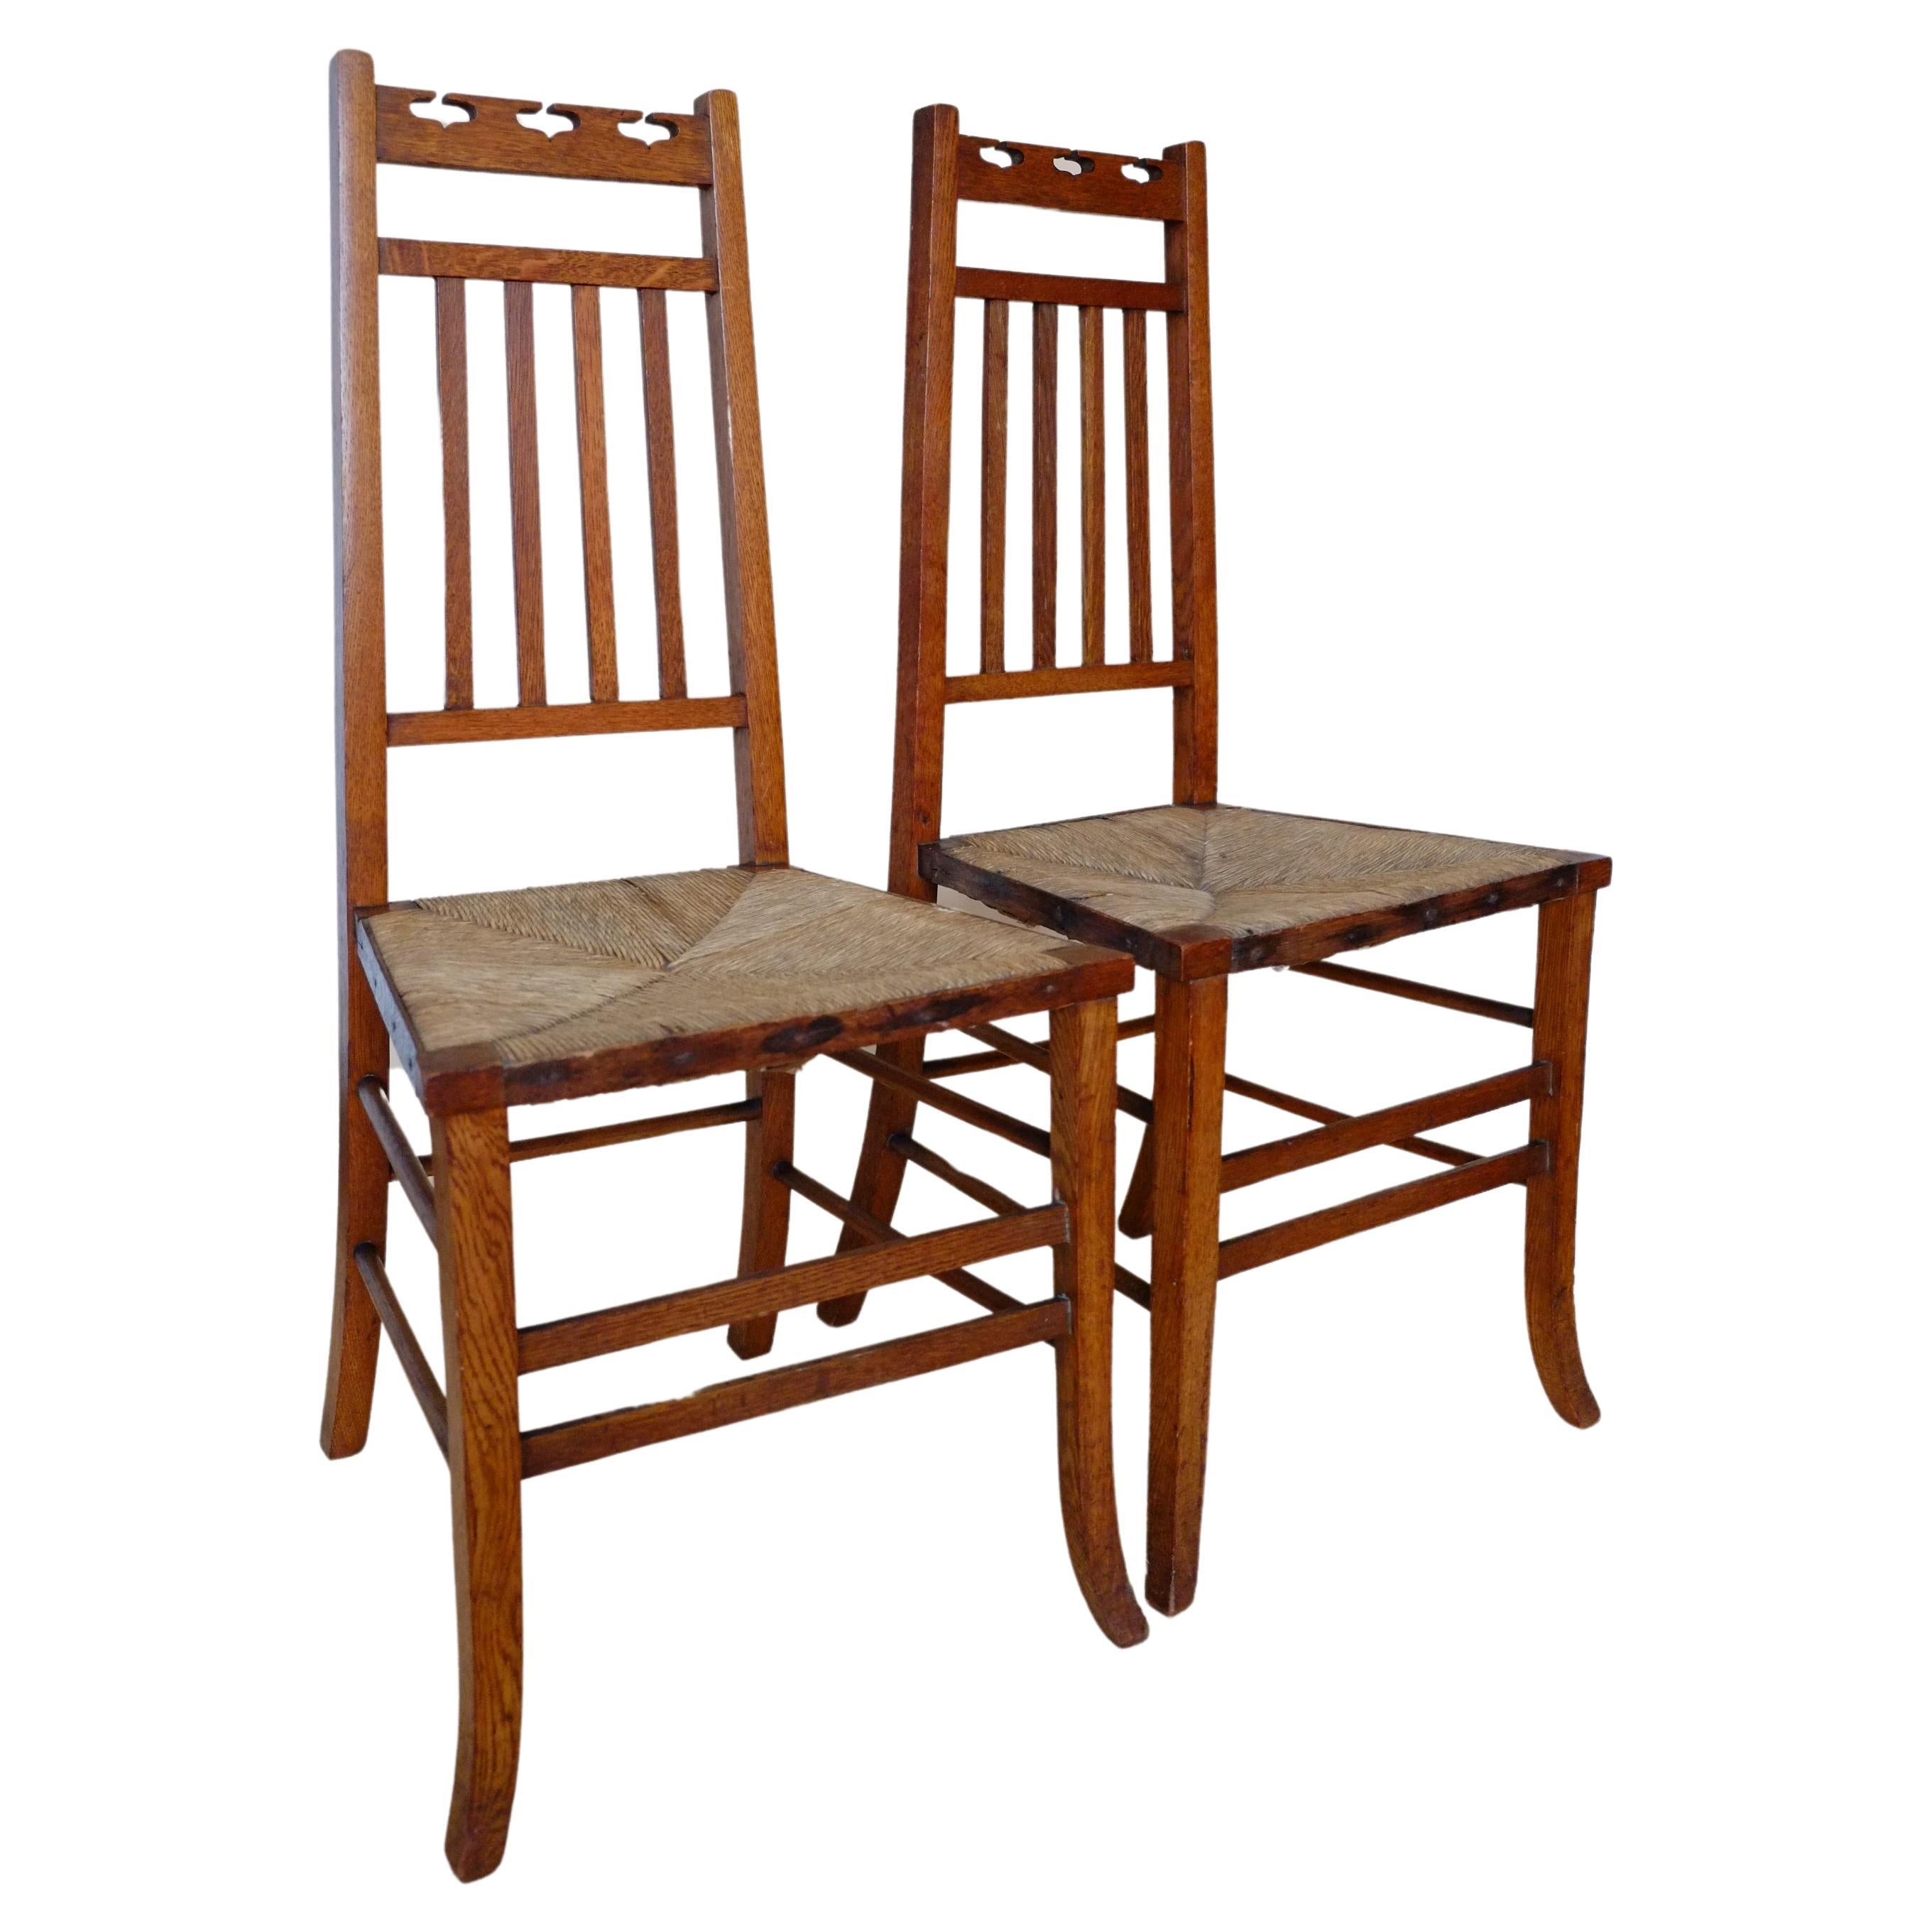 Beautiful Pair of Scottish Arts & Crafts Oak Bedroom Side Chairs by E A Taylor